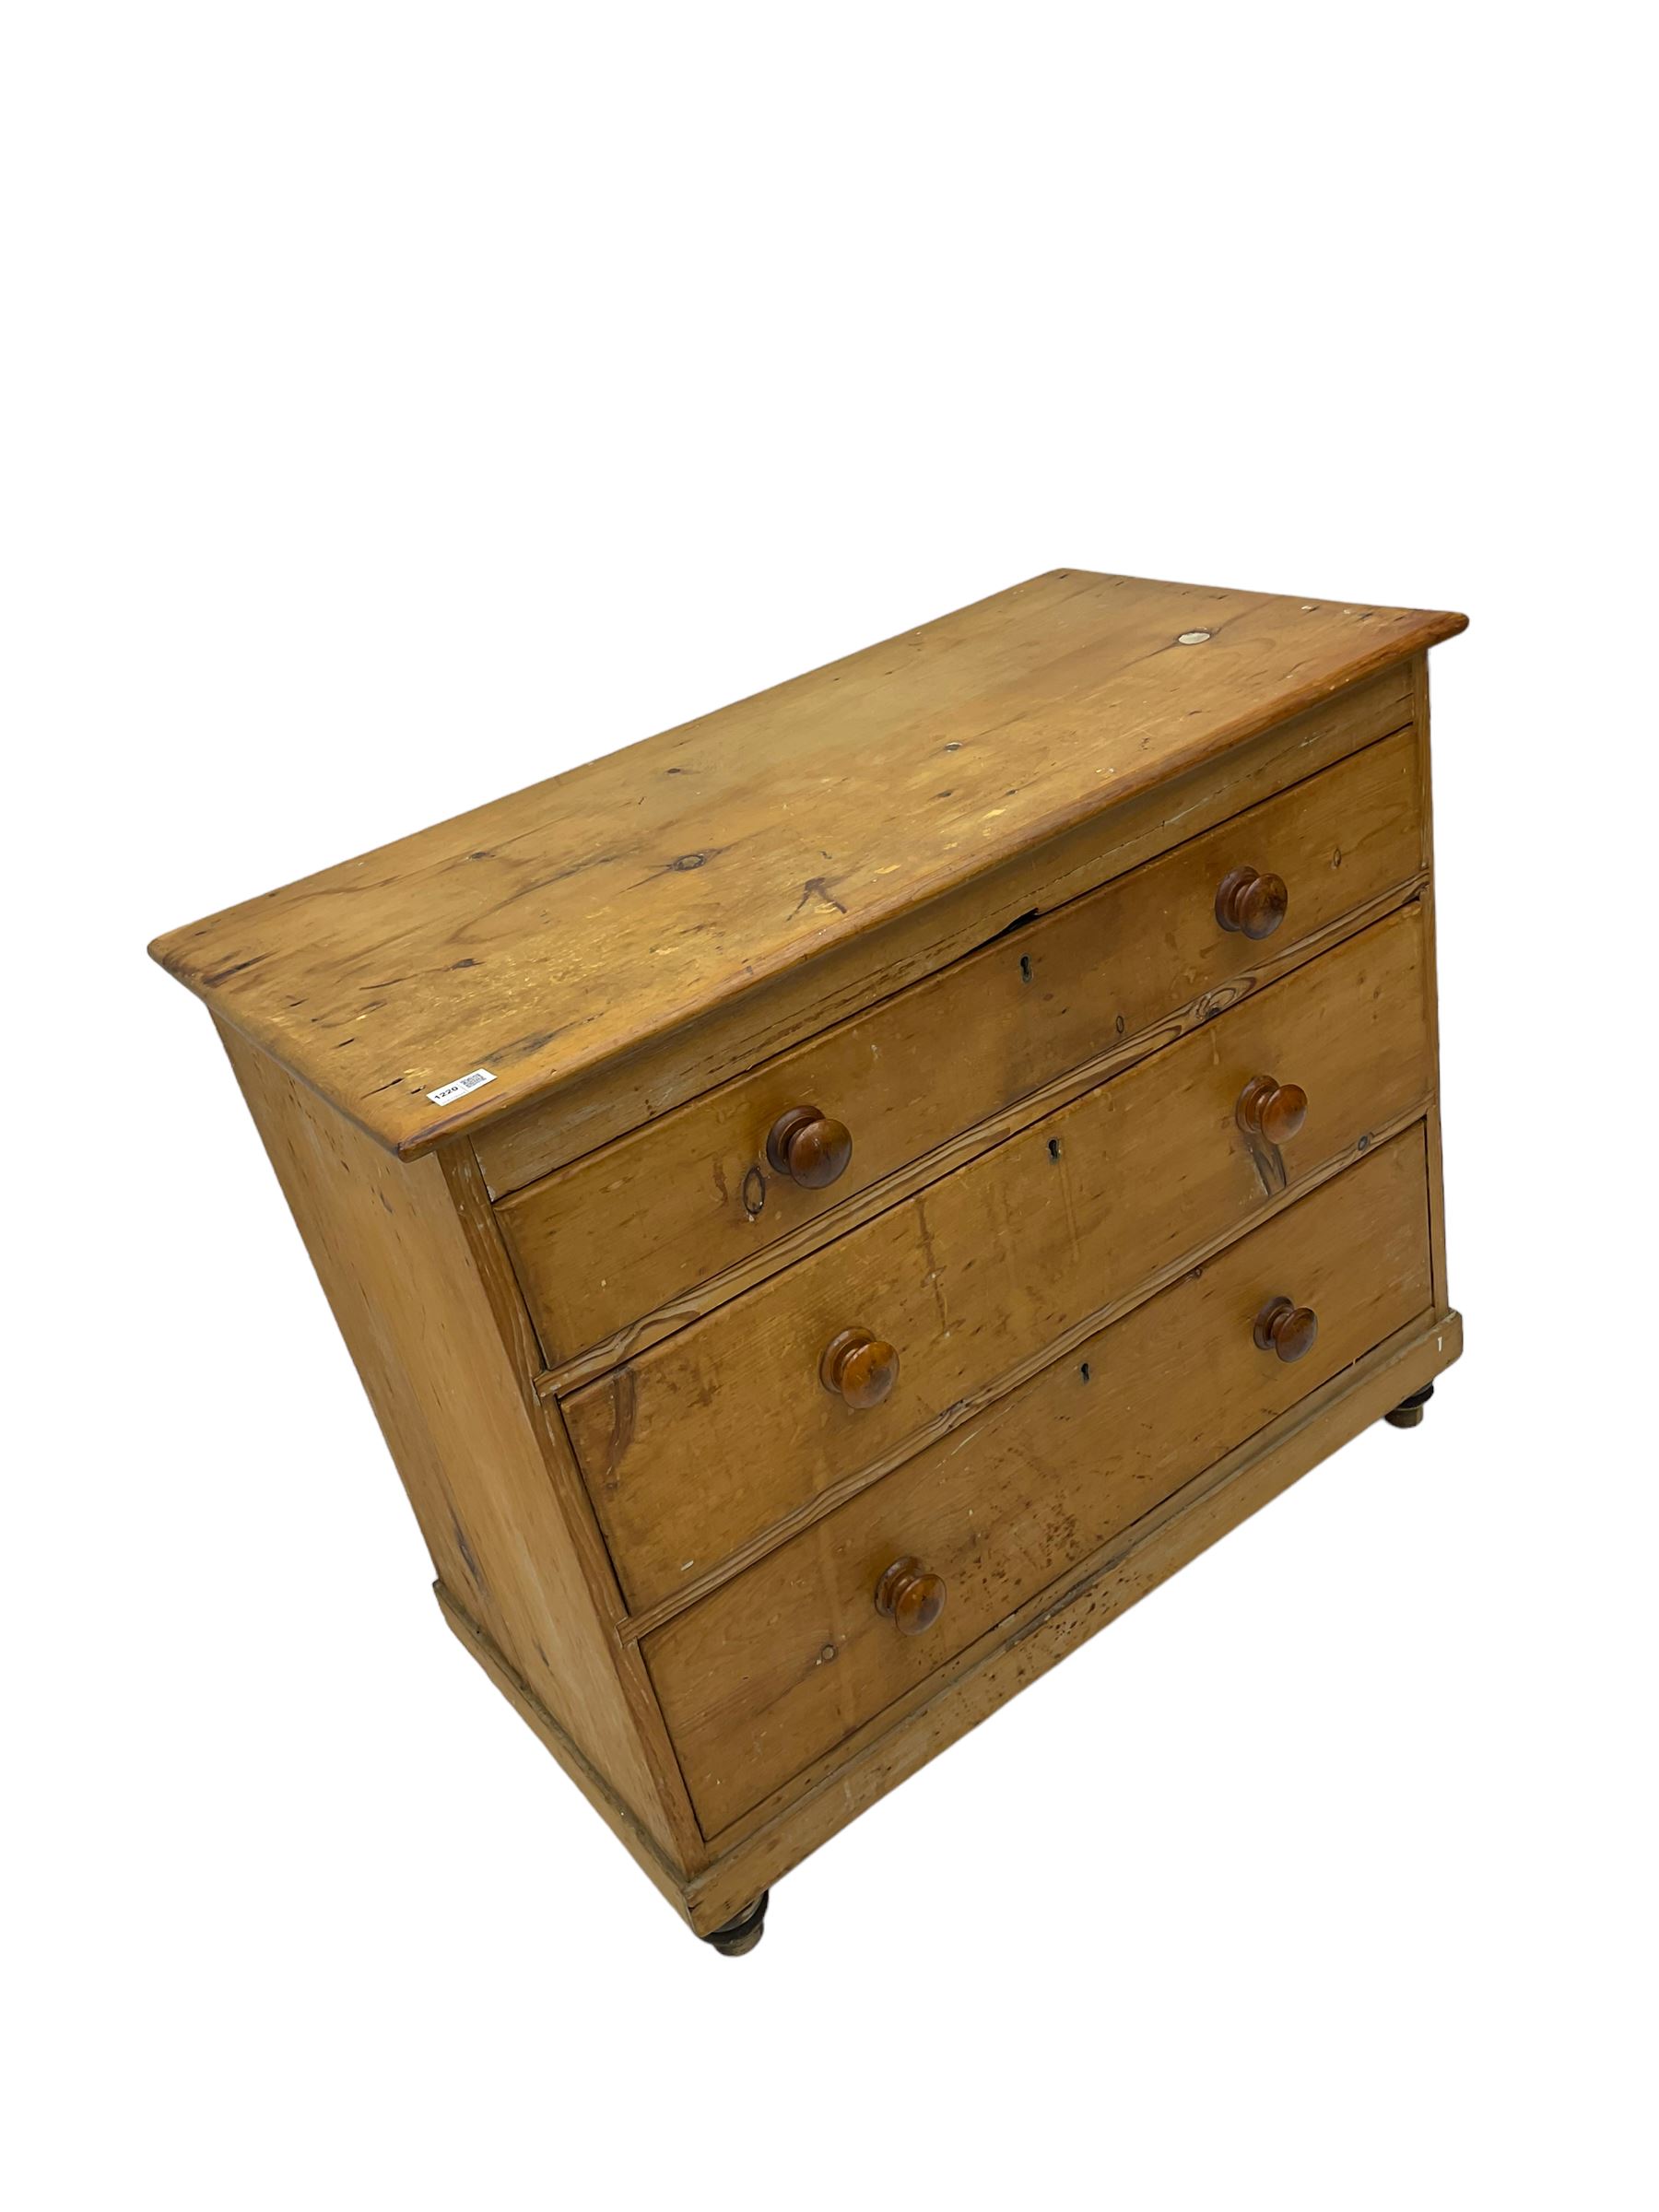 Victorian waxed pine chest - Image 4 of 7